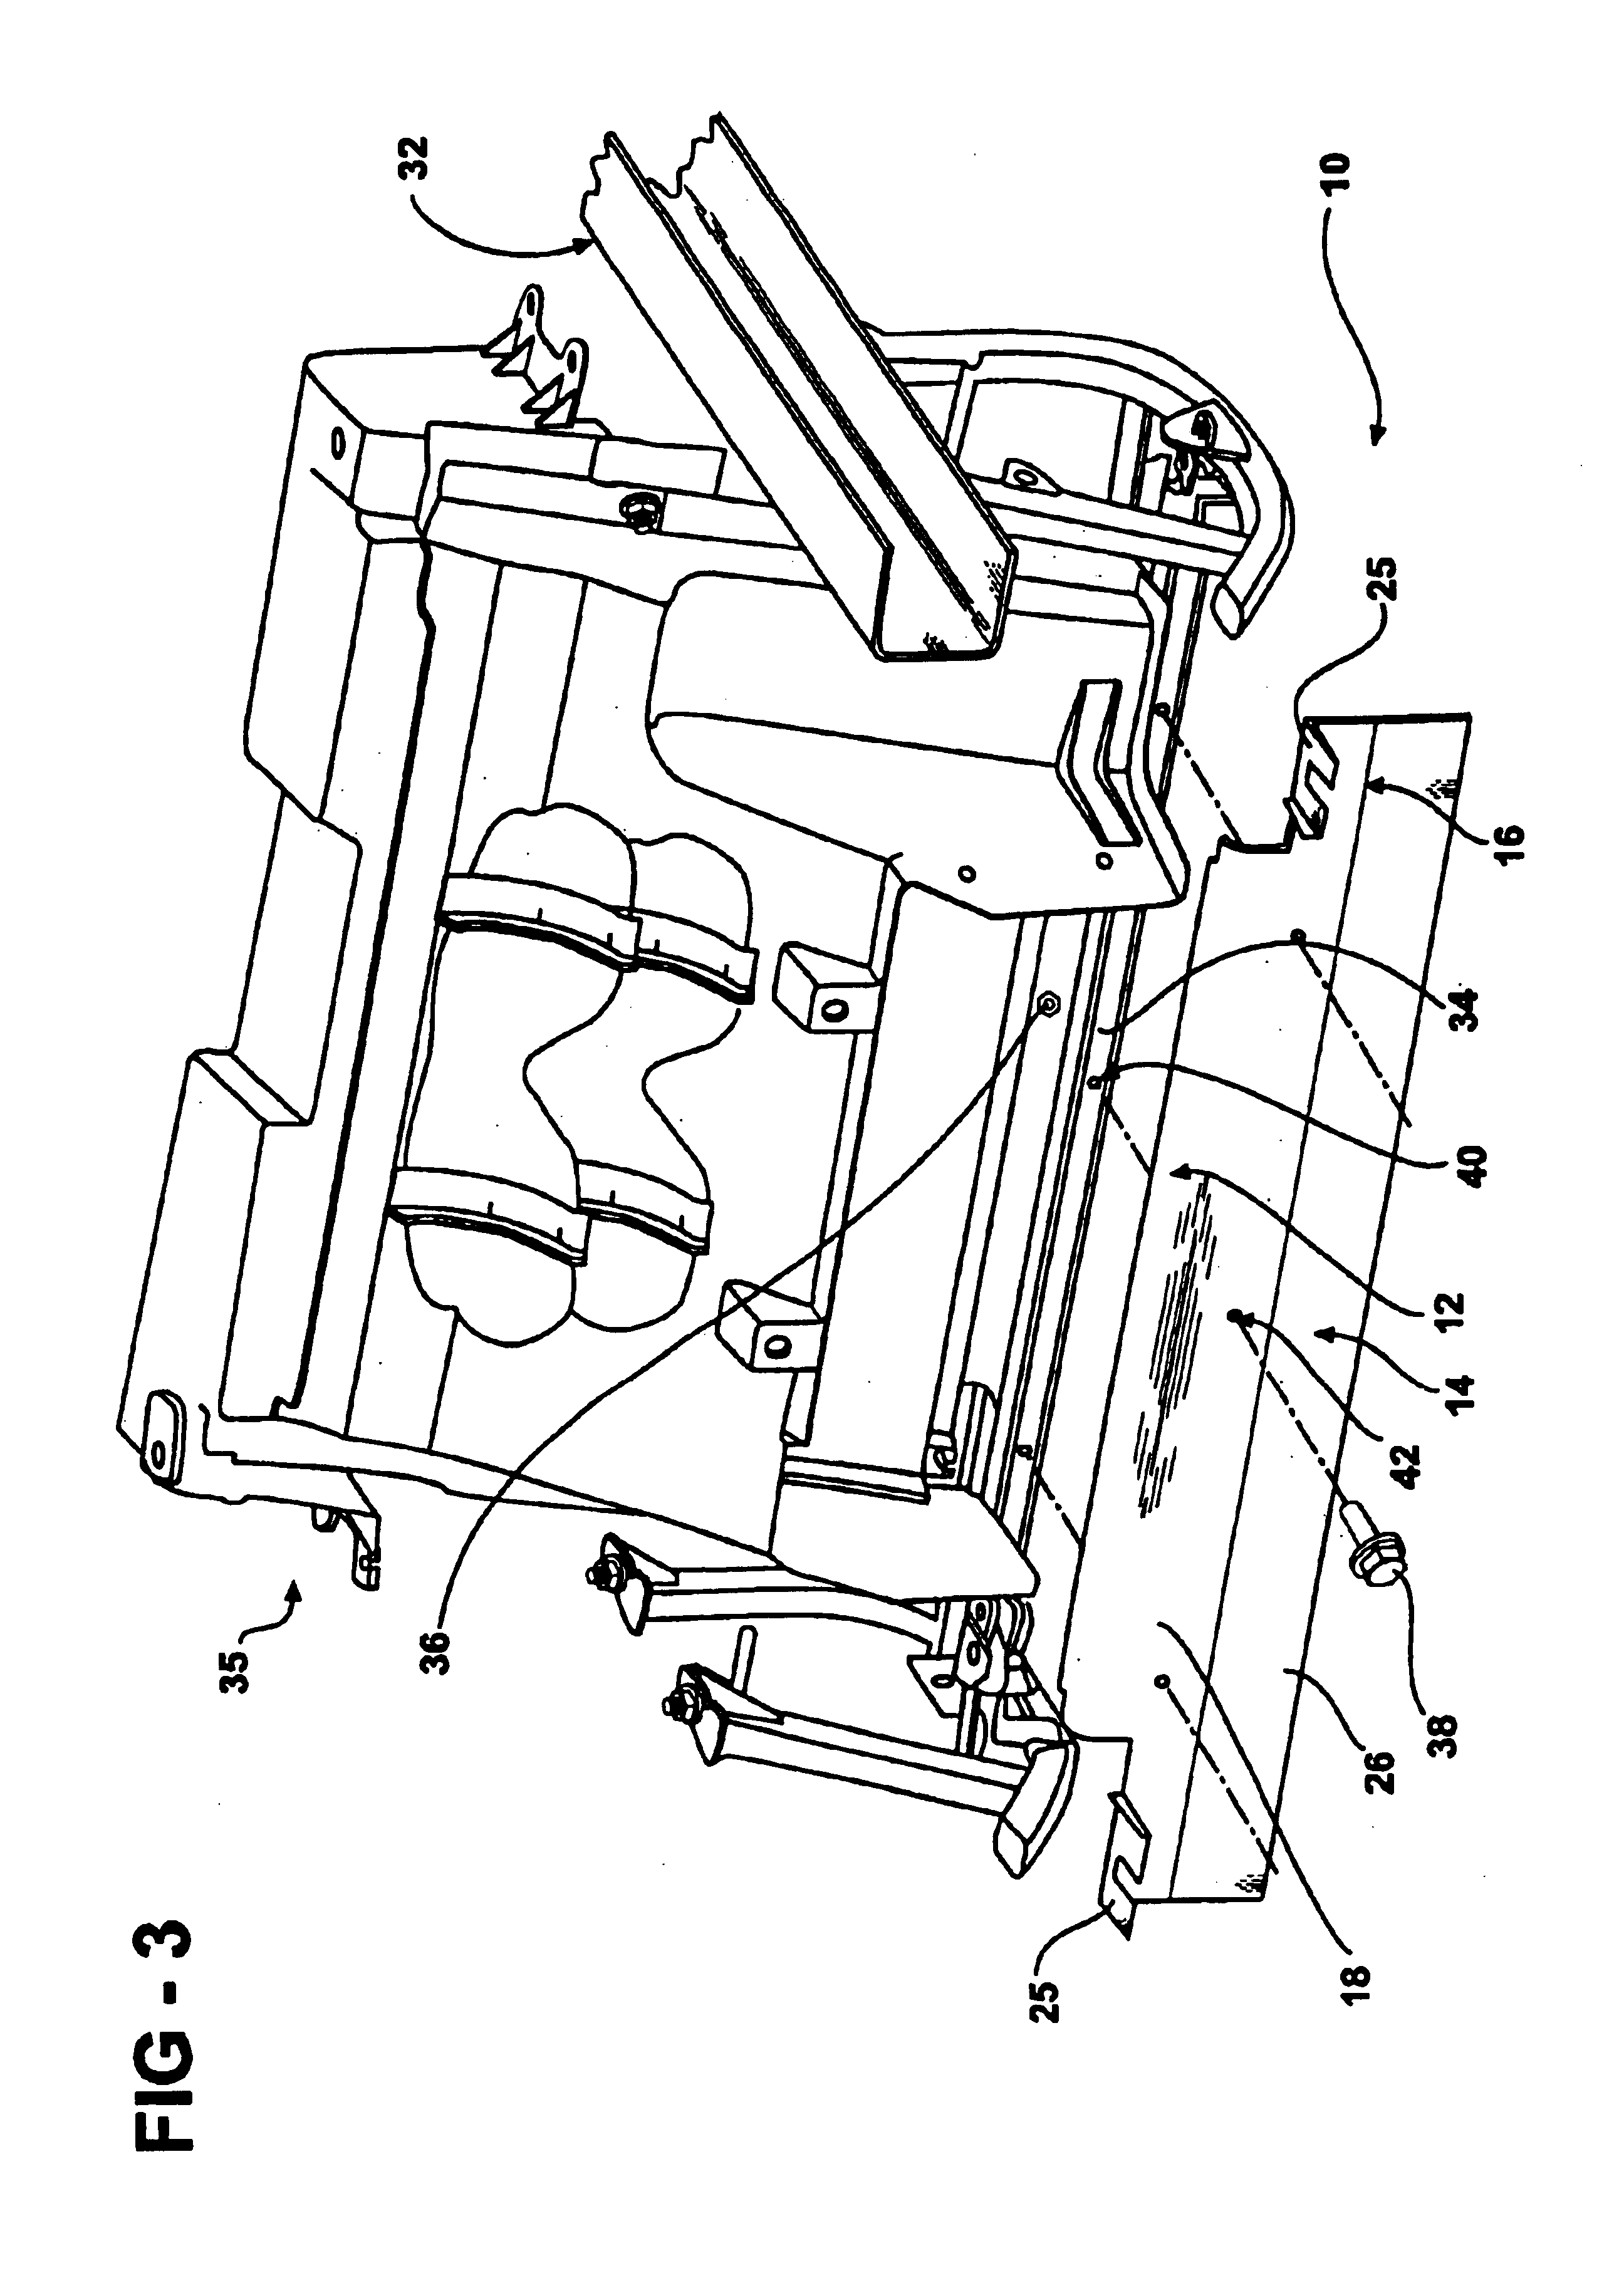 Air deflector for attachment to a lower surface of a vehicle and method for producing the same